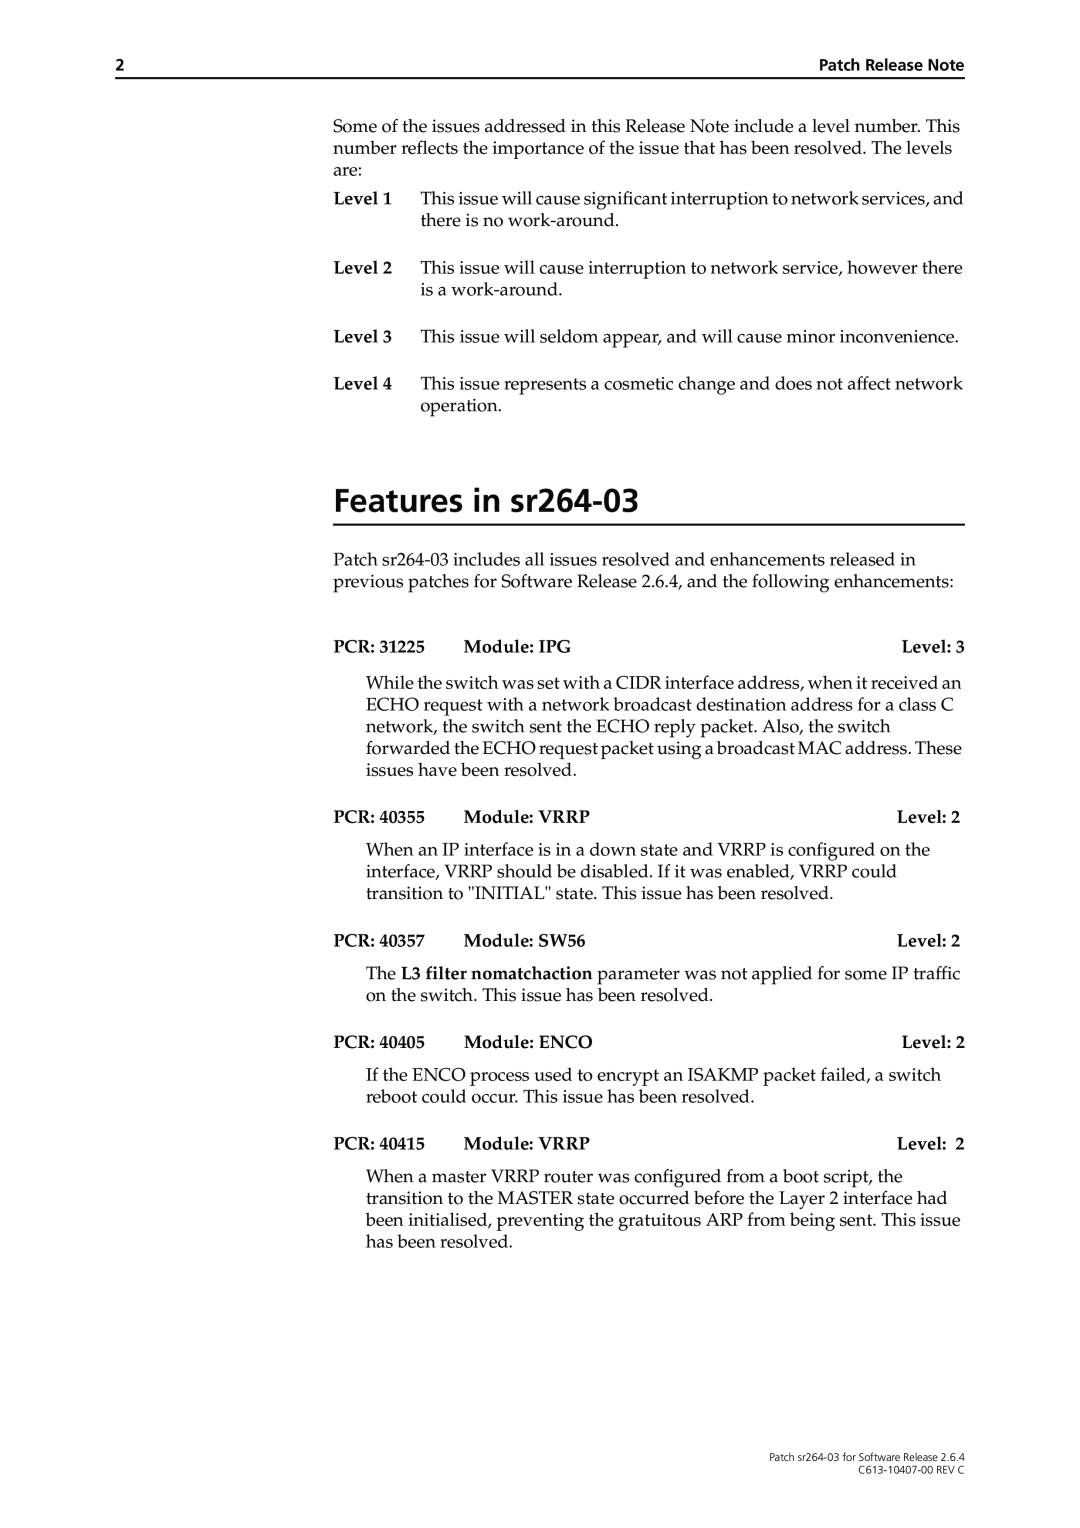 Allied Telesis manual Features in sr264-03, Patch Release Note 